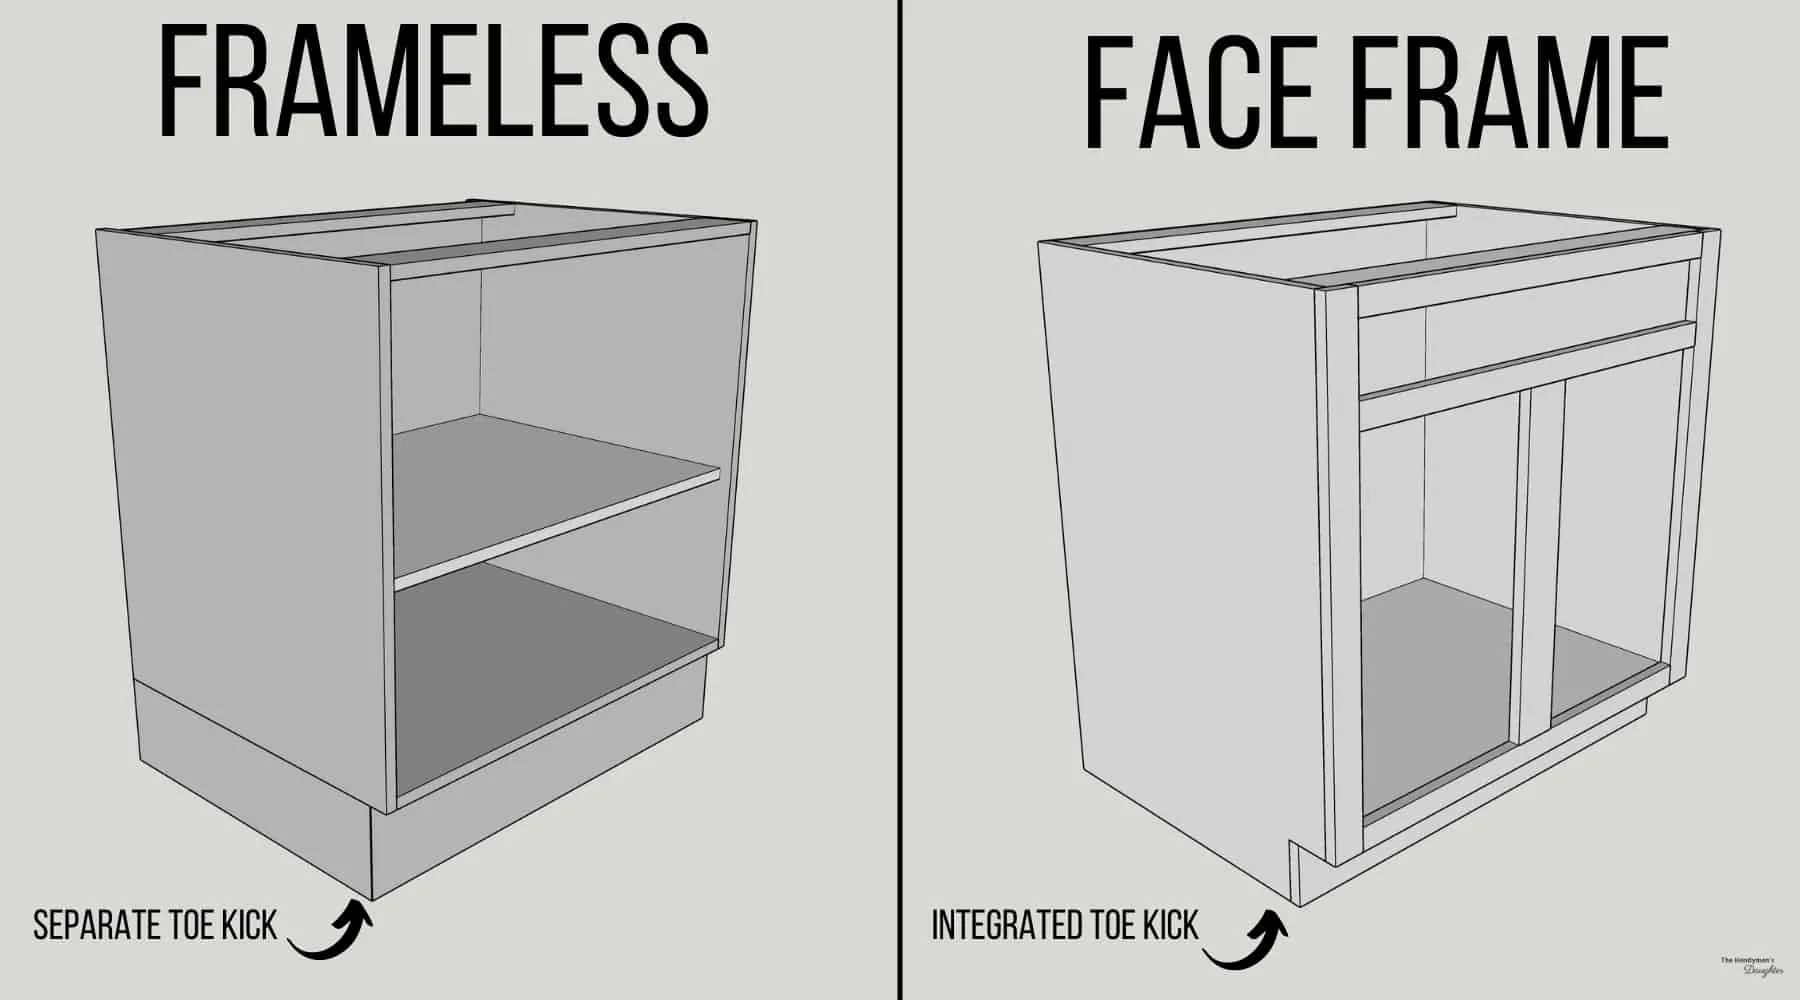 frameless vs face frame cabinets diagram comparing both styles